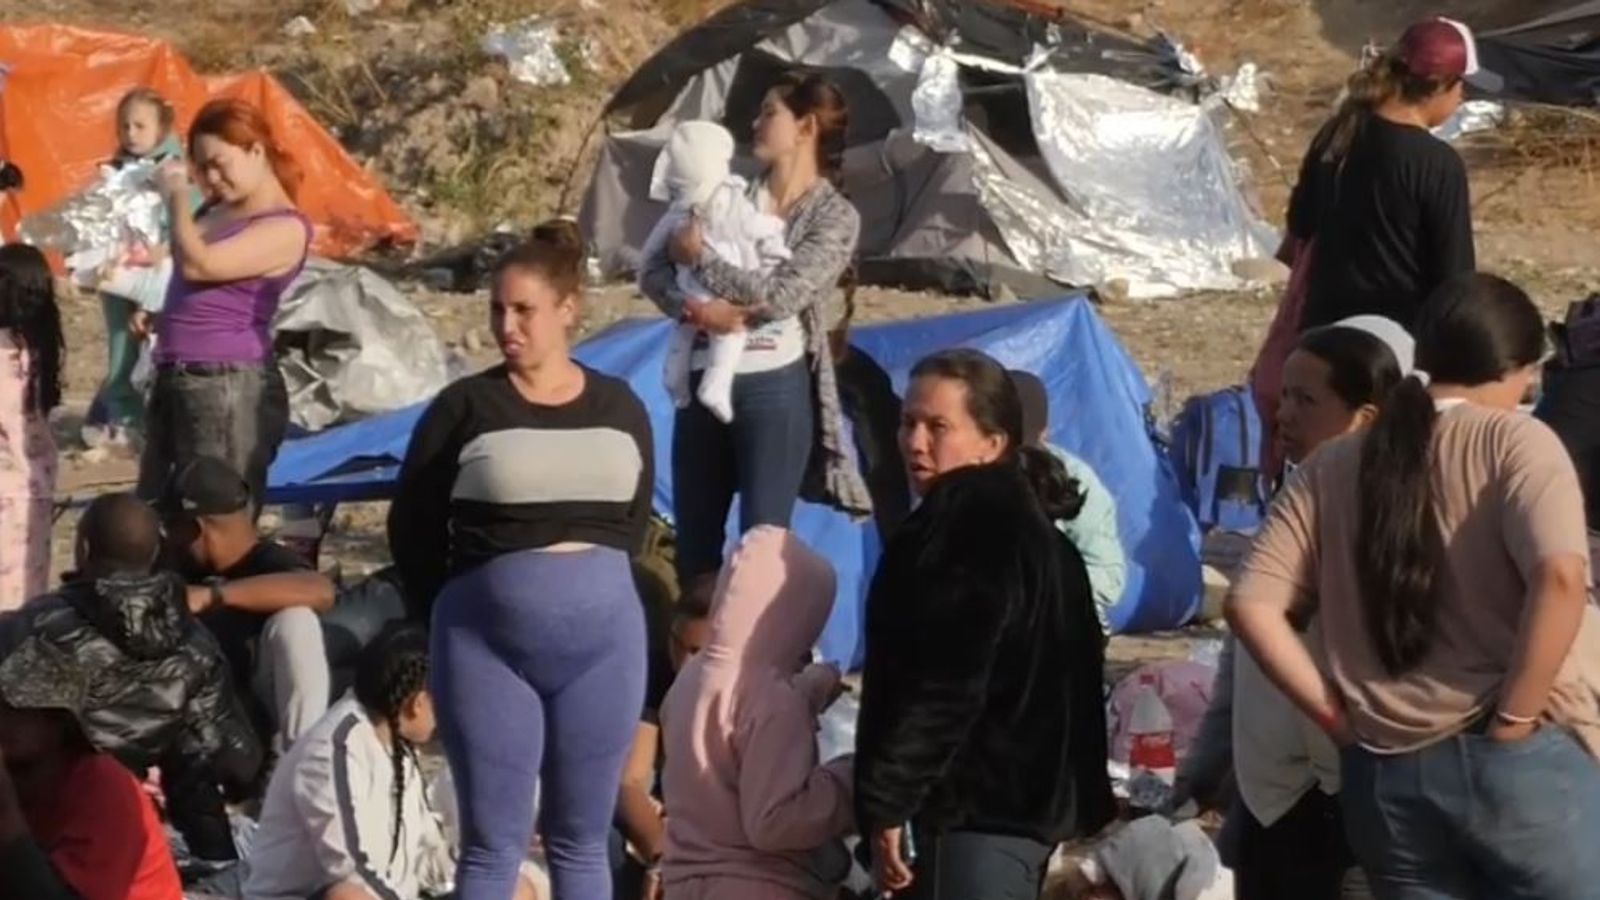 Chaos at US border is exactly what Biden wanted to avoid - with women and children outnumbering men